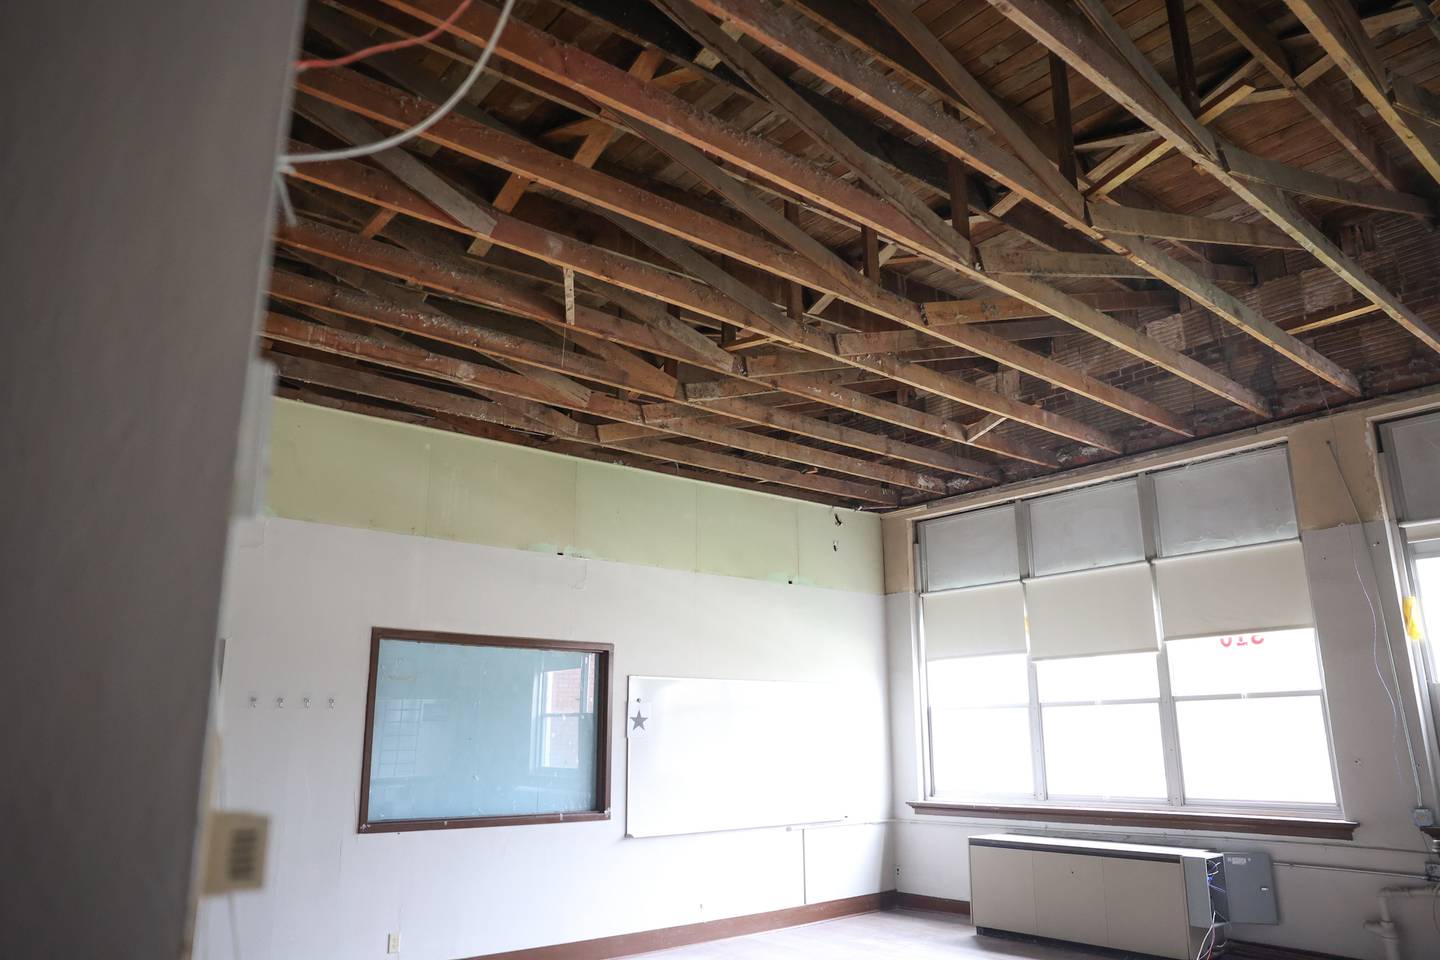 The roof of the 1932 section of the Lockport Township High School Central Campus is exposed in a classroom after the ceiling was taken down.